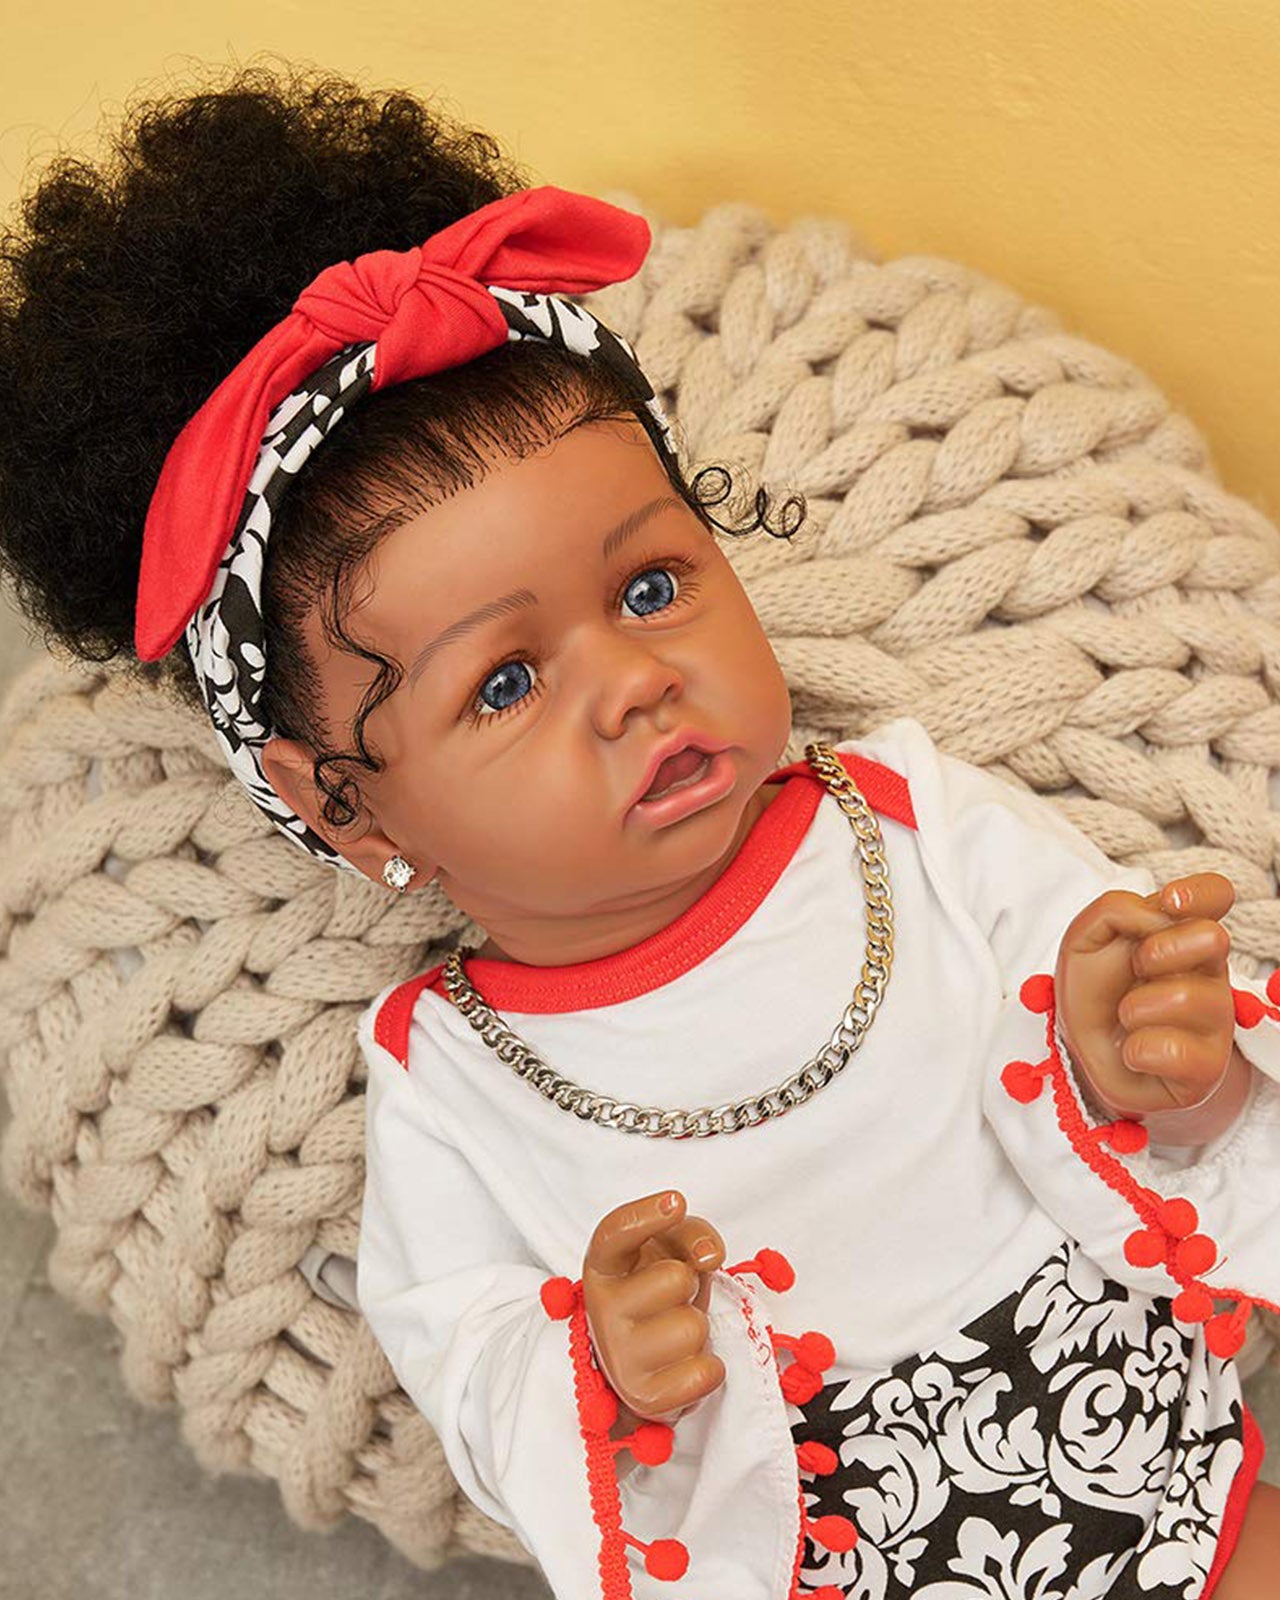 Sutton - 20" Reborn Baby Dolls Realistic African American Newborn Girl with Curly Long Hair